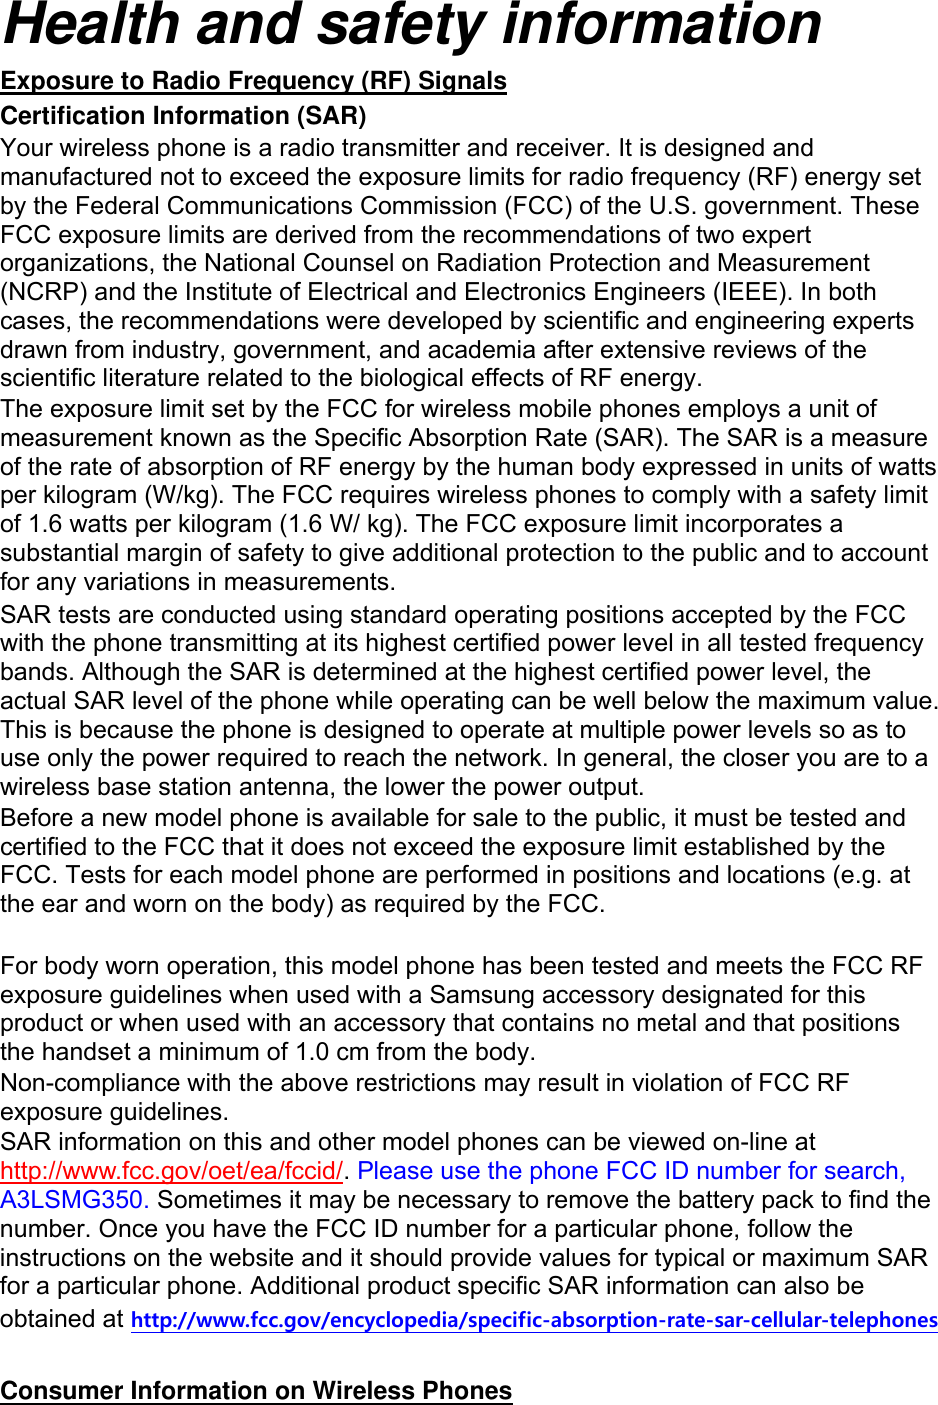 Health and safety information Exposure to Radio Frequency (RF) Signals Certification Information (SAR) Your wireless phone is a radio transmitter and receiver. It is designed and manufactured not to exceed the exposure limits for radio frequency (RF) energy set by the Federal Communications Commission (FCC) of the U.S. government. These FCC exposure limits are derived from the recommendations of two expert organizations, the National Counsel on Radiation Protection and Measurement (NCRP) and the Institute of Electrical and Electronics Engineers (IEEE). In both cases, the recommendations were developed by scientific and engineering experts drawn from industry, government, and academia after extensive reviews of the scientific literature related to the biological effects of RF energy. The exposure limit set by the FCC for wireless mobile phones employs a unit of measurement known as the Specific Absorption Rate (SAR). The SAR is a measure of the rate of absorption of RF energy by the human body expressed in units of watts per kilogram (W/kg). The FCC requires wireless phones to comply with a safety limit of 1.6 watts per kilogram (1.6 W/ kg). The FCC exposure limit incorporates a substantial margin of safety to give additional protection to the public and to account for any variations in measurements. SAR tests are conducted using standard operating positions accepted by the FCC with the phone transmitting at its highest certified power level in all tested frequency bands. Although the SAR is determined at the highest certified power level, the actual SAR level of the phone while operating can be well below the maximum value. This is because the phone is designed to operate at multiple power levels so as to use only the power required to reach the network. In general, the closer you are to a wireless base station antenna, the lower the power output. Before a new model phone is available for sale to the public, it must be tested and certified to the FCC that it does not exceed the exposure limit established by the FCC. Tests for each model phone are performed in positions and locations (e.g. at the ear and worn on the body) as required by the FCC.      For body worn operation, this model phone has been tested and meets the FCC RF exposure guidelines when used with a Samsung accessory designated for this product or when used with an accessory that contains no metal and that positions the handset a minimum of 1.0 cm from the body.   Non-compliance with the above restrictions may result in violation of FCC RF exposure guidelines. SAR information on this and other model phones can be viewed on-line at http://www.fcc.gov/oet/ea/fccid/. Please use the phone FCC ID number for search, A3LSMG350. Sometimes it may be necessary to remove the battery pack to find the number. Once you have the FCC ID number for a particular phone, follow the instructions on the website and it should provide values for typical or maximum SAR for a particular phone. Additional product specific SAR information can also be obtained at http://www.fcc.gov/encyclopedia/specific-absorption-rate-sar-cellular-telephones  Consumer Information on Wireless Phones 